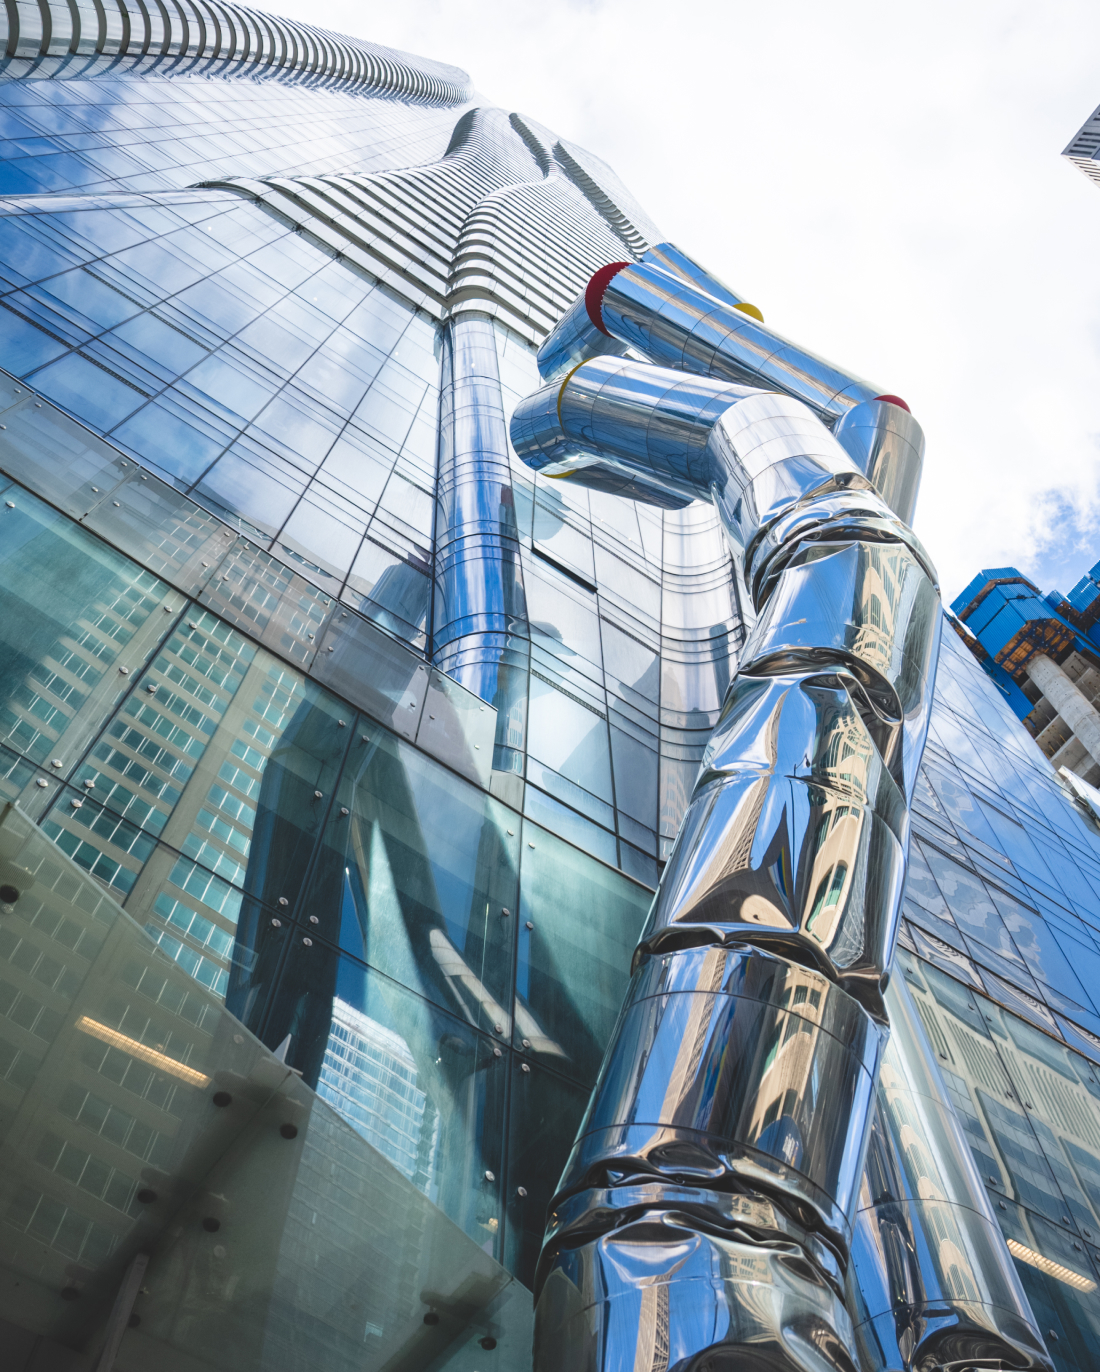 Low-angle view of a shiny, tubular stainless steel sculpture resembling a bent pipe installed along the exterior of a modern glass skyscraper with reflections of the sky and surrounding buildings.